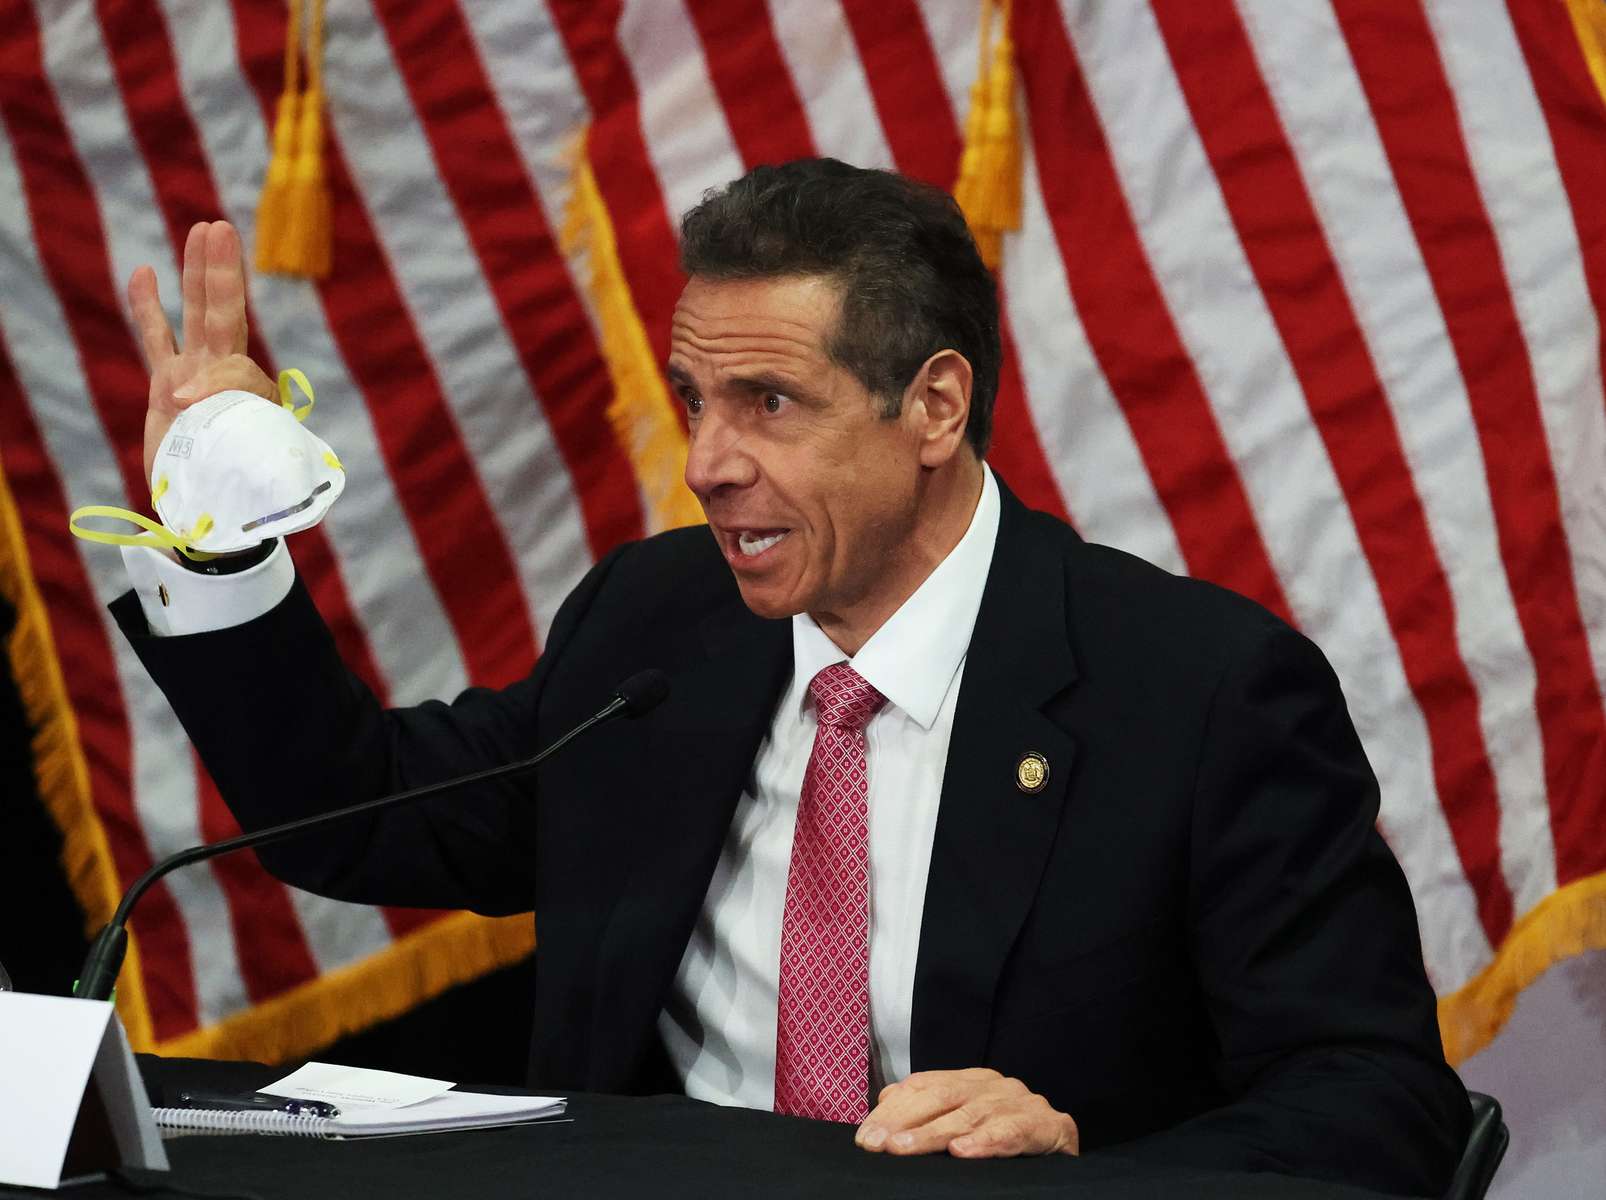 New York Governor Andrew Cuomo displays the N-95 mask he wears during a Coronavirus Briefing At Northwell Feinstein Institute For Medical Research on May 06, 2020 in Manhasset, New York. 